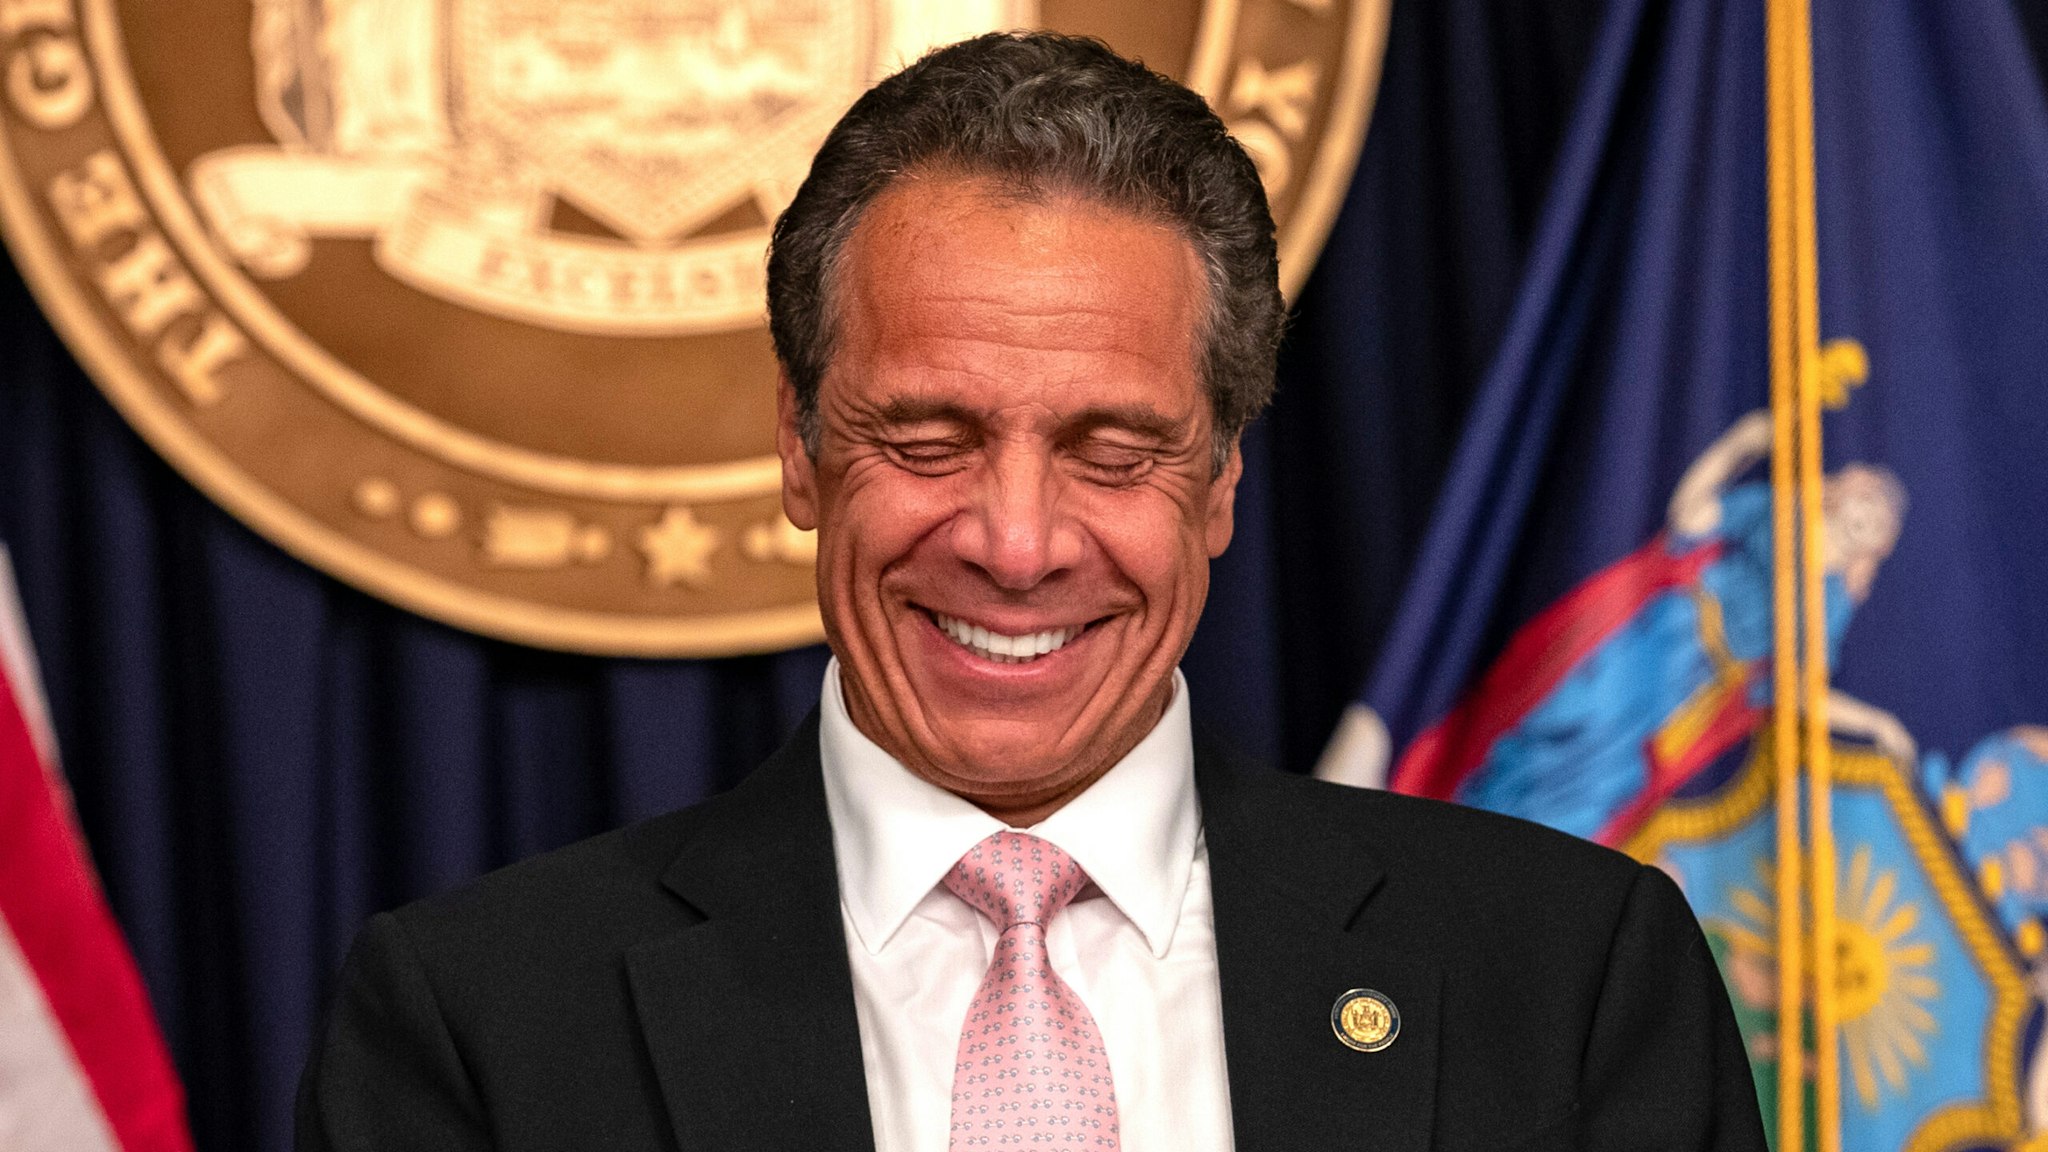 Governor Andrew Cuomo reacts during the daily media briefing at the Office of the Governor of the State of New York on June 12, 2020 in New York City. Gov. Andrew Cuomo signed the "Say Their Name" reform legislation, an agenda that calls for better policing standards in New York State in the wake of recent protests and in response to George Floyd's death.